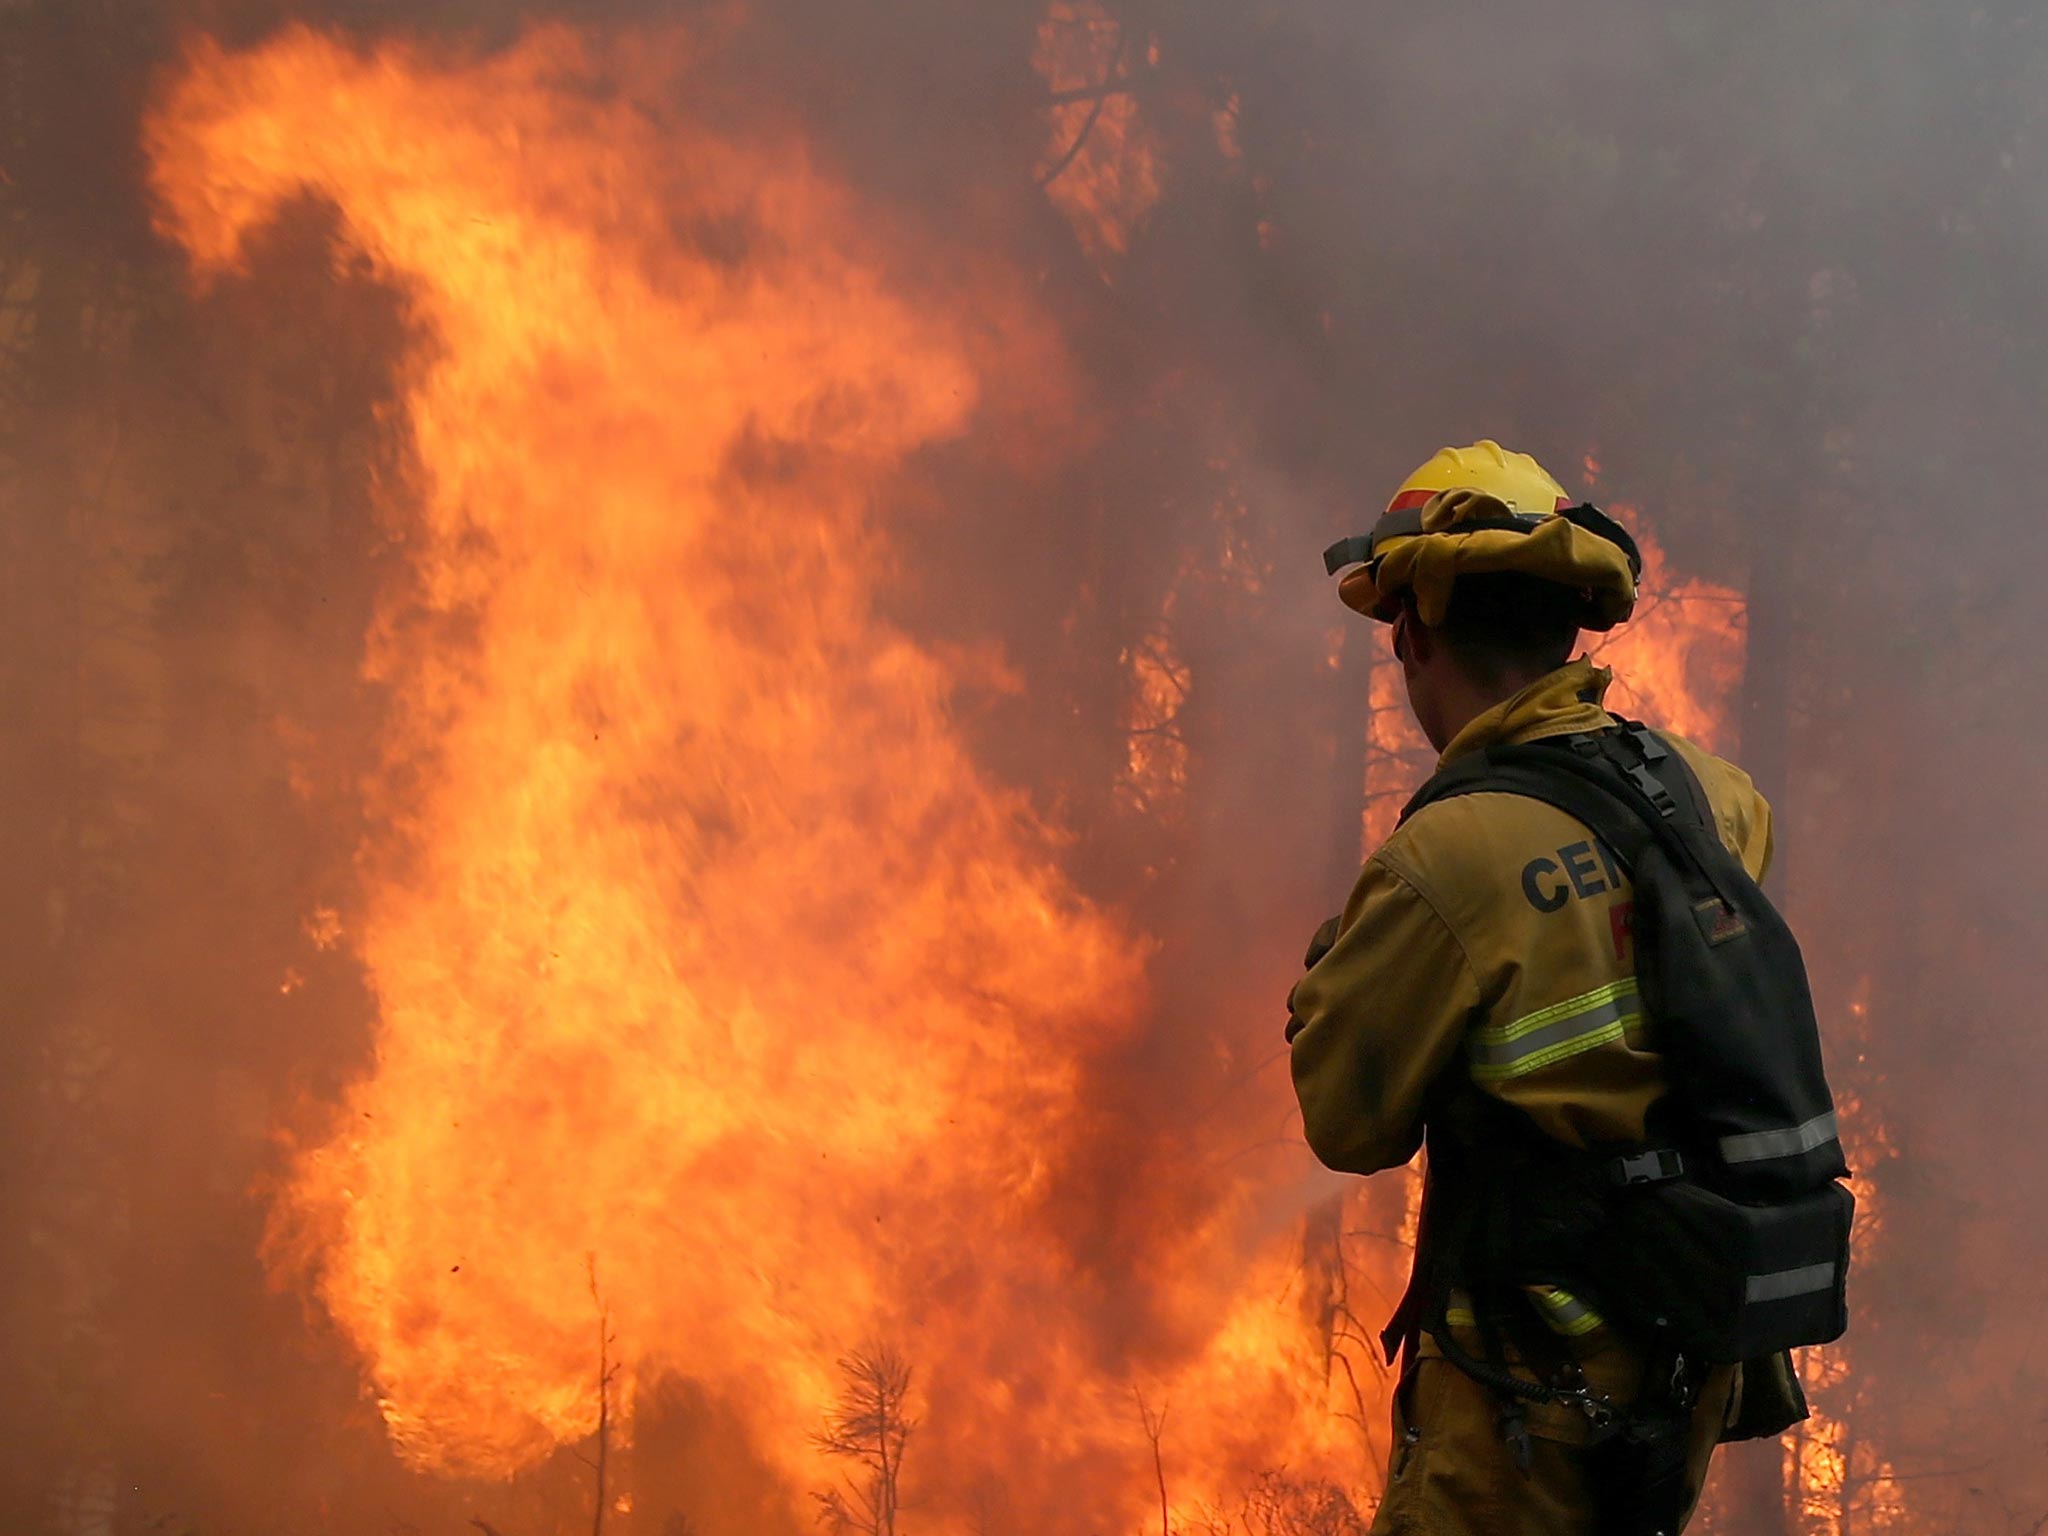 A firefighter from Central Calaveras Fire monitors the Rim Fire in Groveland, California